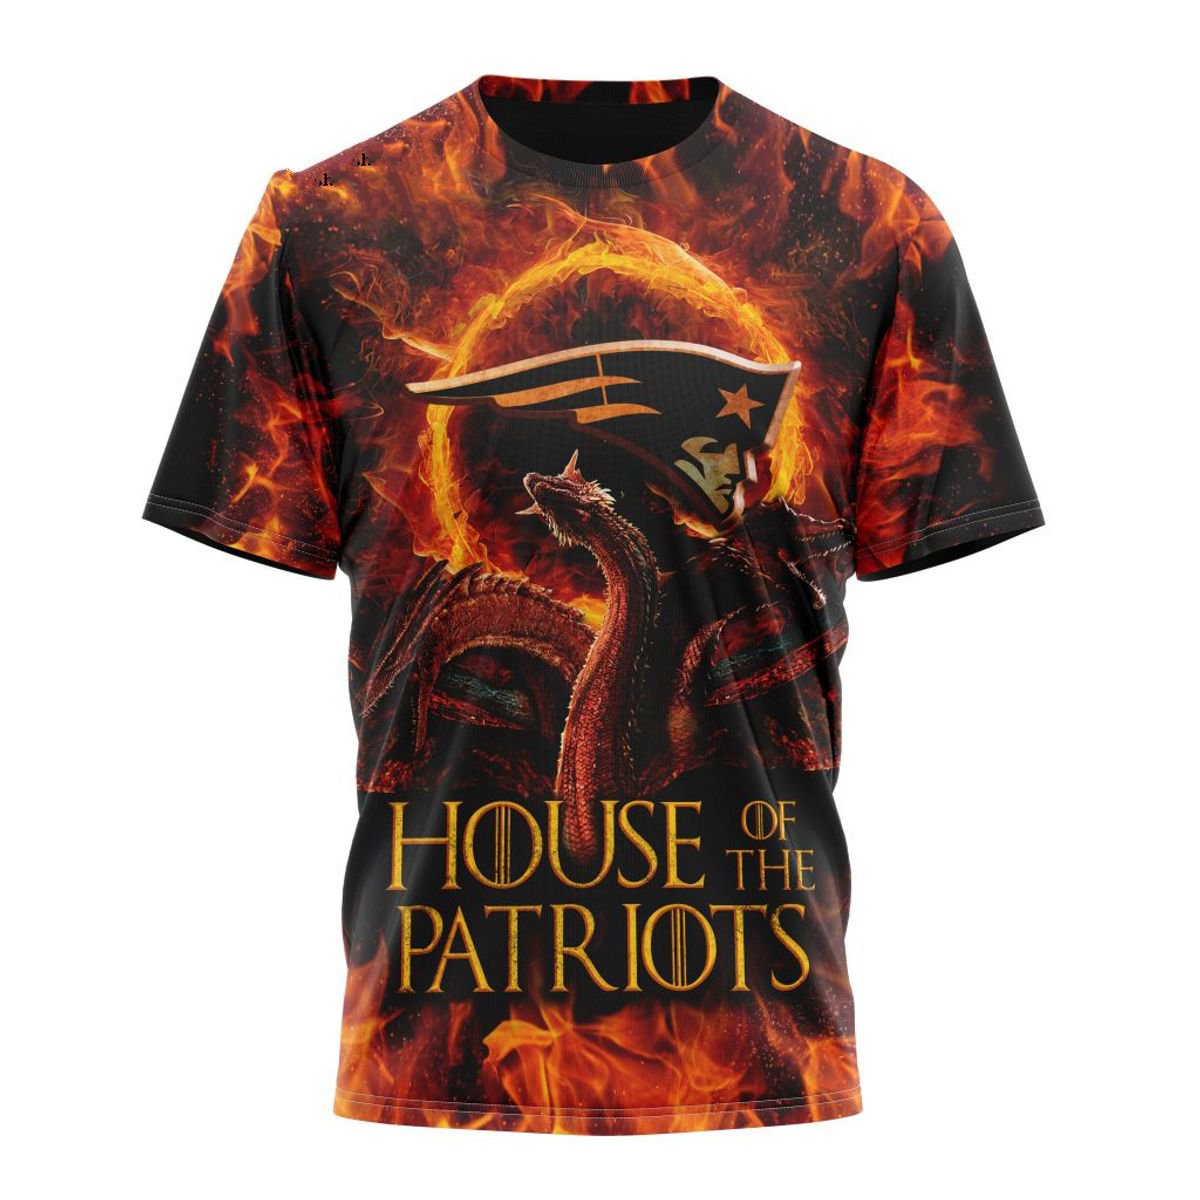 NEW ENGLAND PATRIOTS GAME OF THRONES – HOUSE OF THE PATRIOTS 3D HOODIE